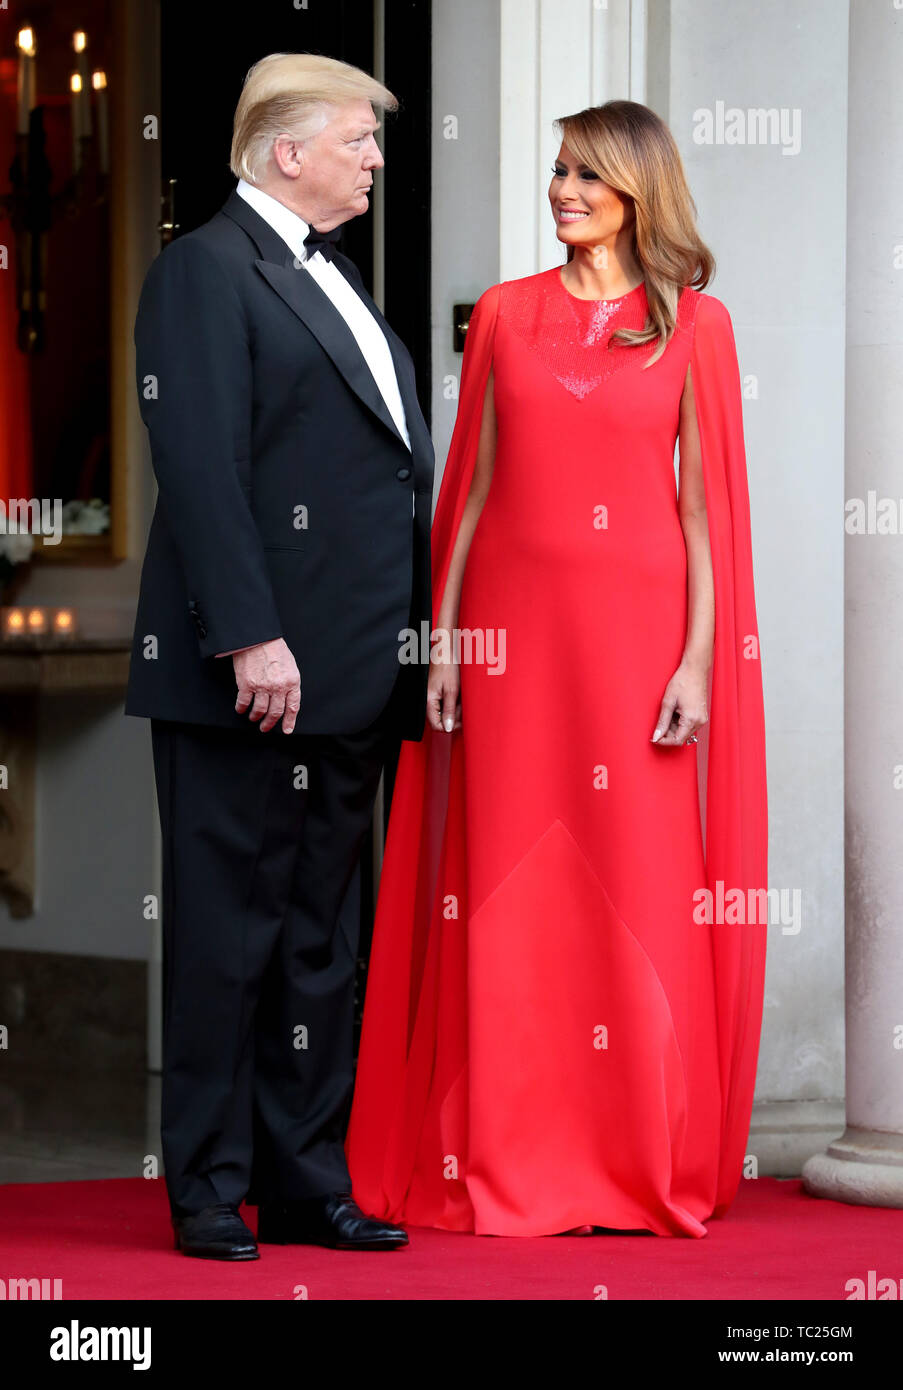 LONDON, ENGLAND - JUNE 04: US President Donald Trump and First Lady Melania Trump pose ahead of a dinner at Winfield House for Prince Charles, Prince of Wales and Camilla, Duchess of Cornwall, during their state visit on June 04, 2019 in London, England. President Trump's three-day state visit began with lunch with the Queen, followed by a State Banquet at Buckingham Palace, whilst today he attended business meetings with the Prime Minister and the Duke of York, before traveling to Portsmouth to mark the 75th anniversary of the D-Day landings. (Photo by Chris Jackson - WPA Pool/Getty Images) Stock Photo